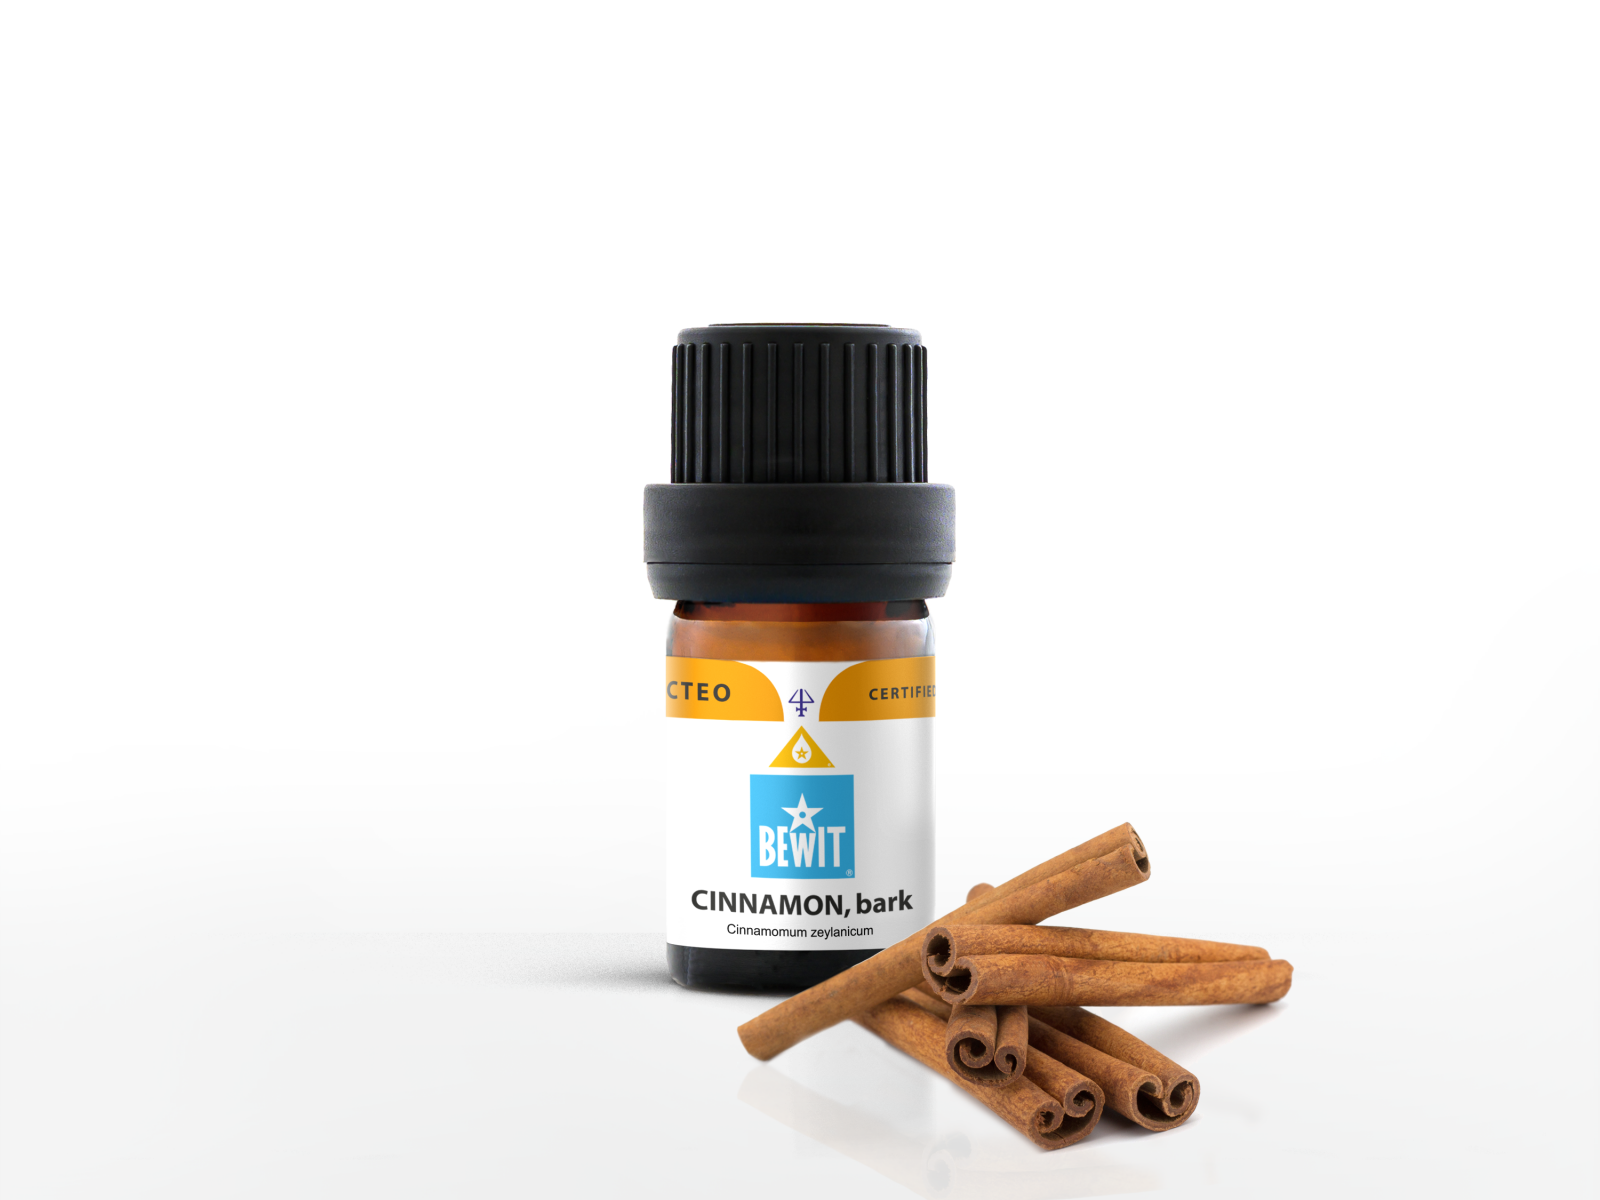 Cinnamon, Bark - This is a 100% pure essential oil - 2